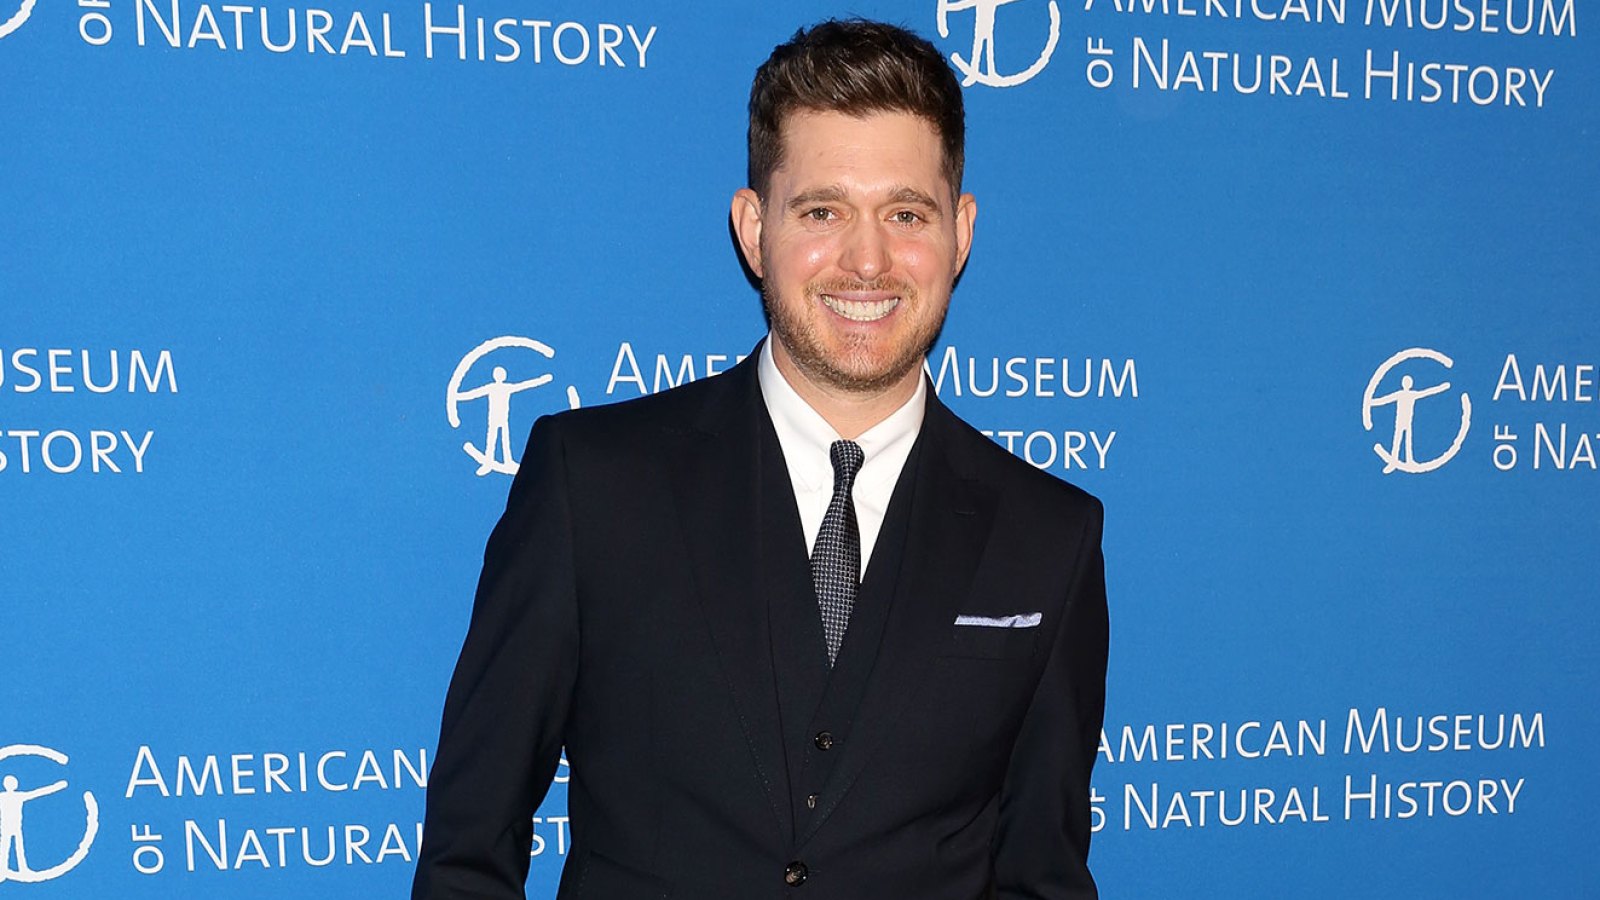 Michael Buble Says He Could Have Been a 'Bigger Star' if He Didn't Have Children